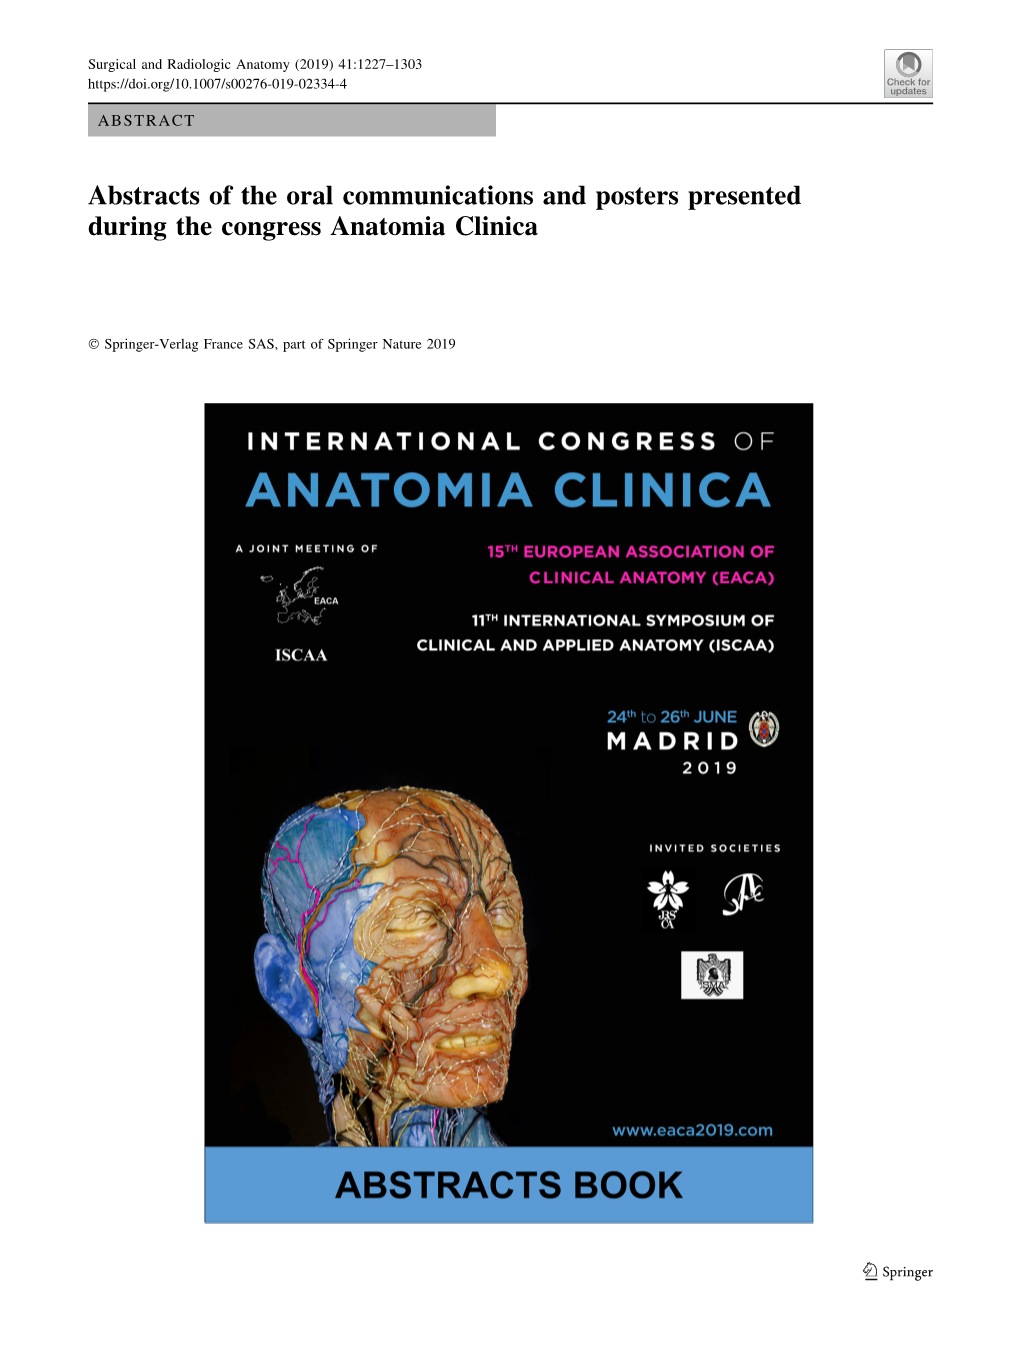 Abstracts of the Oral Communications and Posters Presented During the Congress Anatomia Clinica